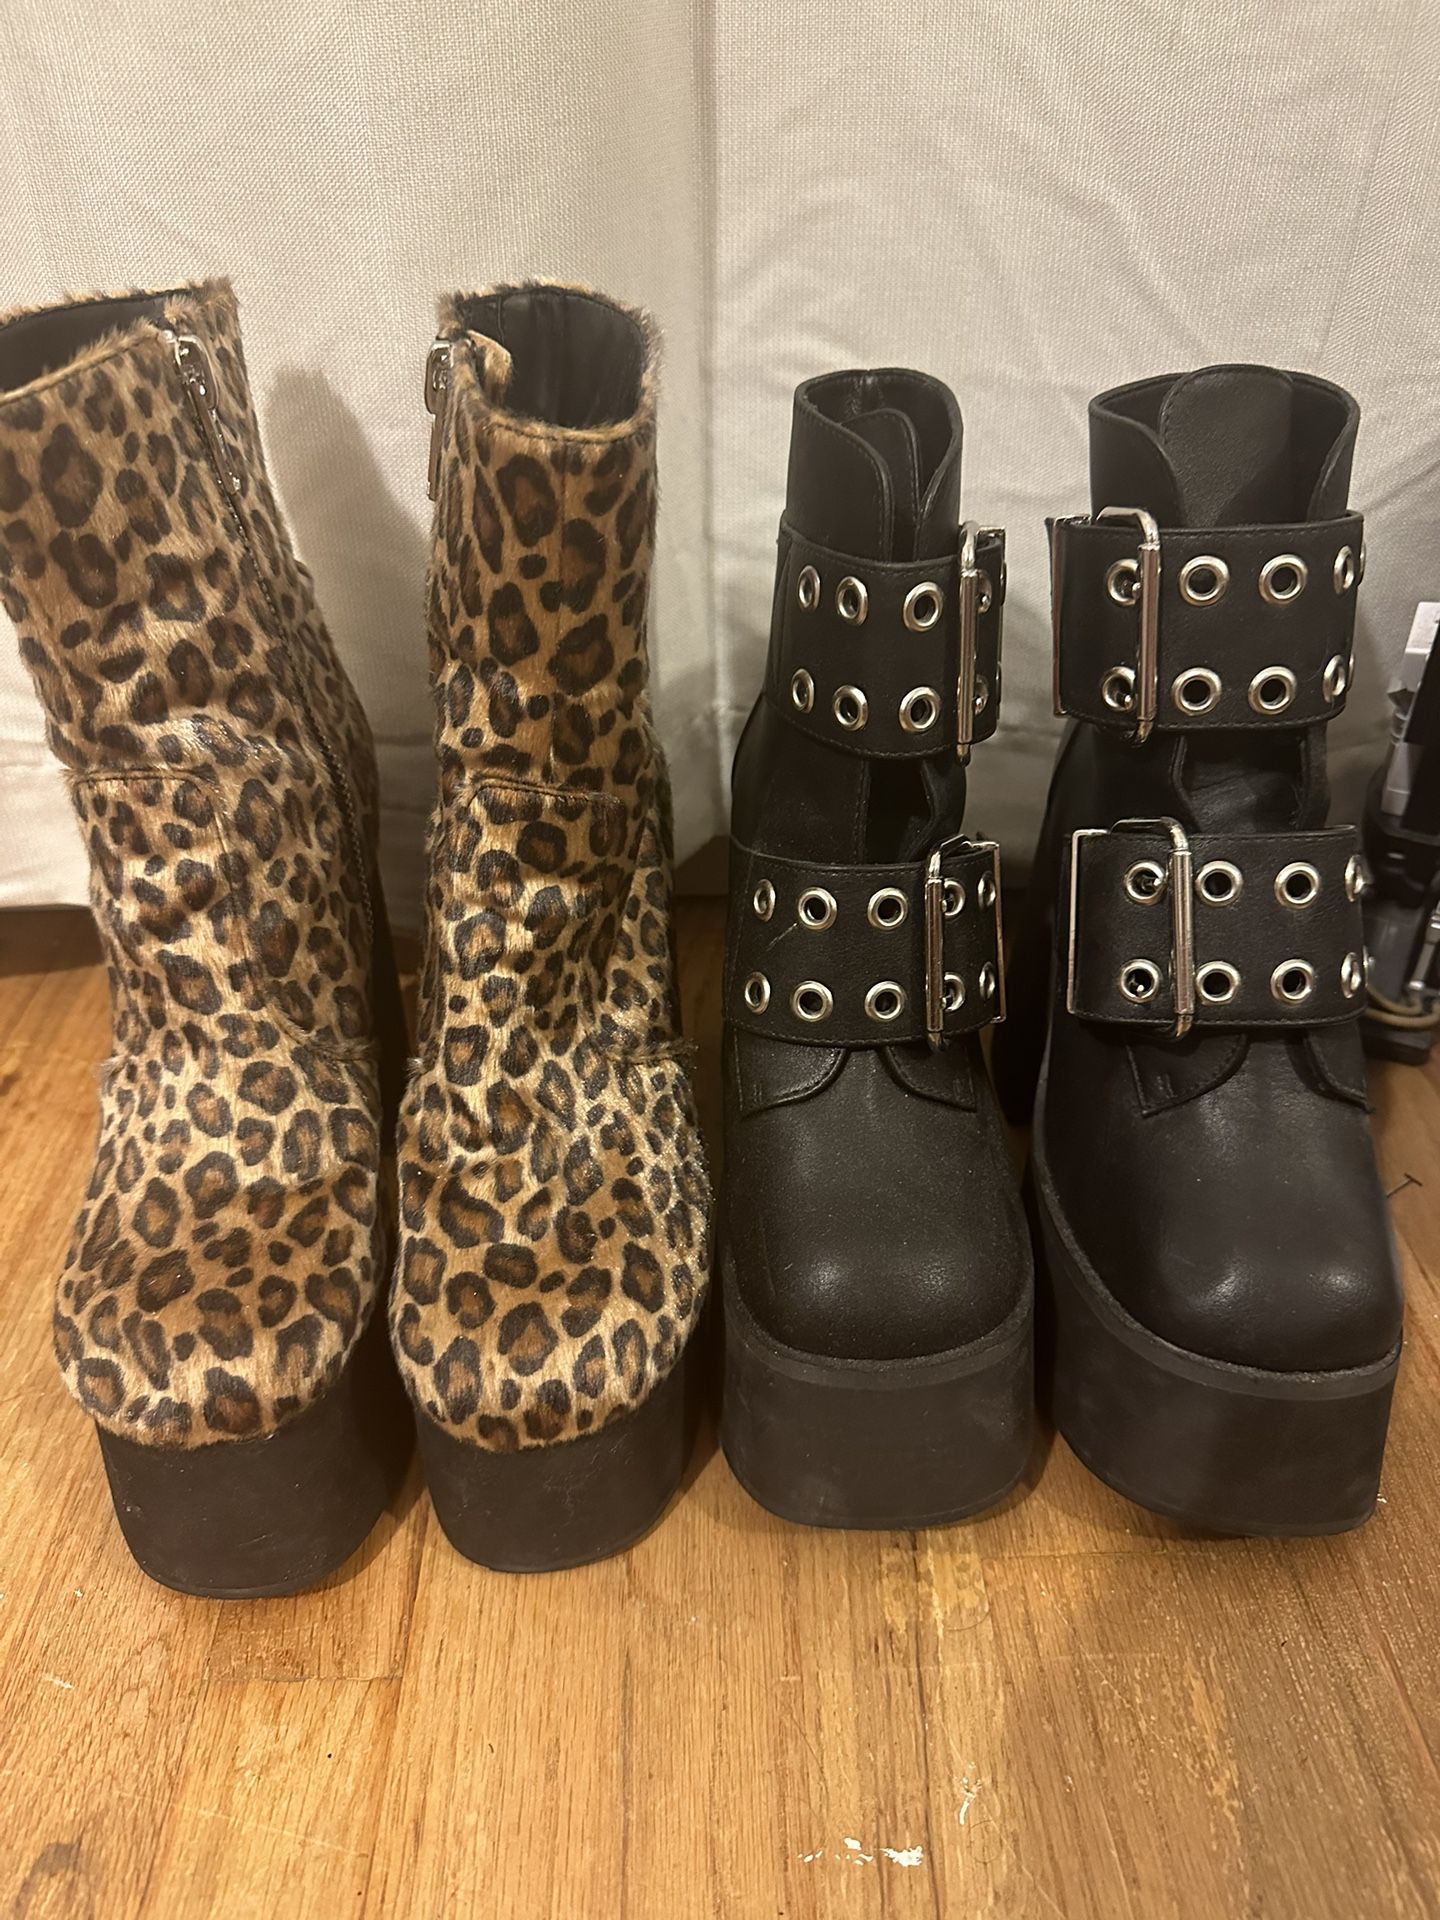 Black Buckle Boots And Leopard Print Boots 